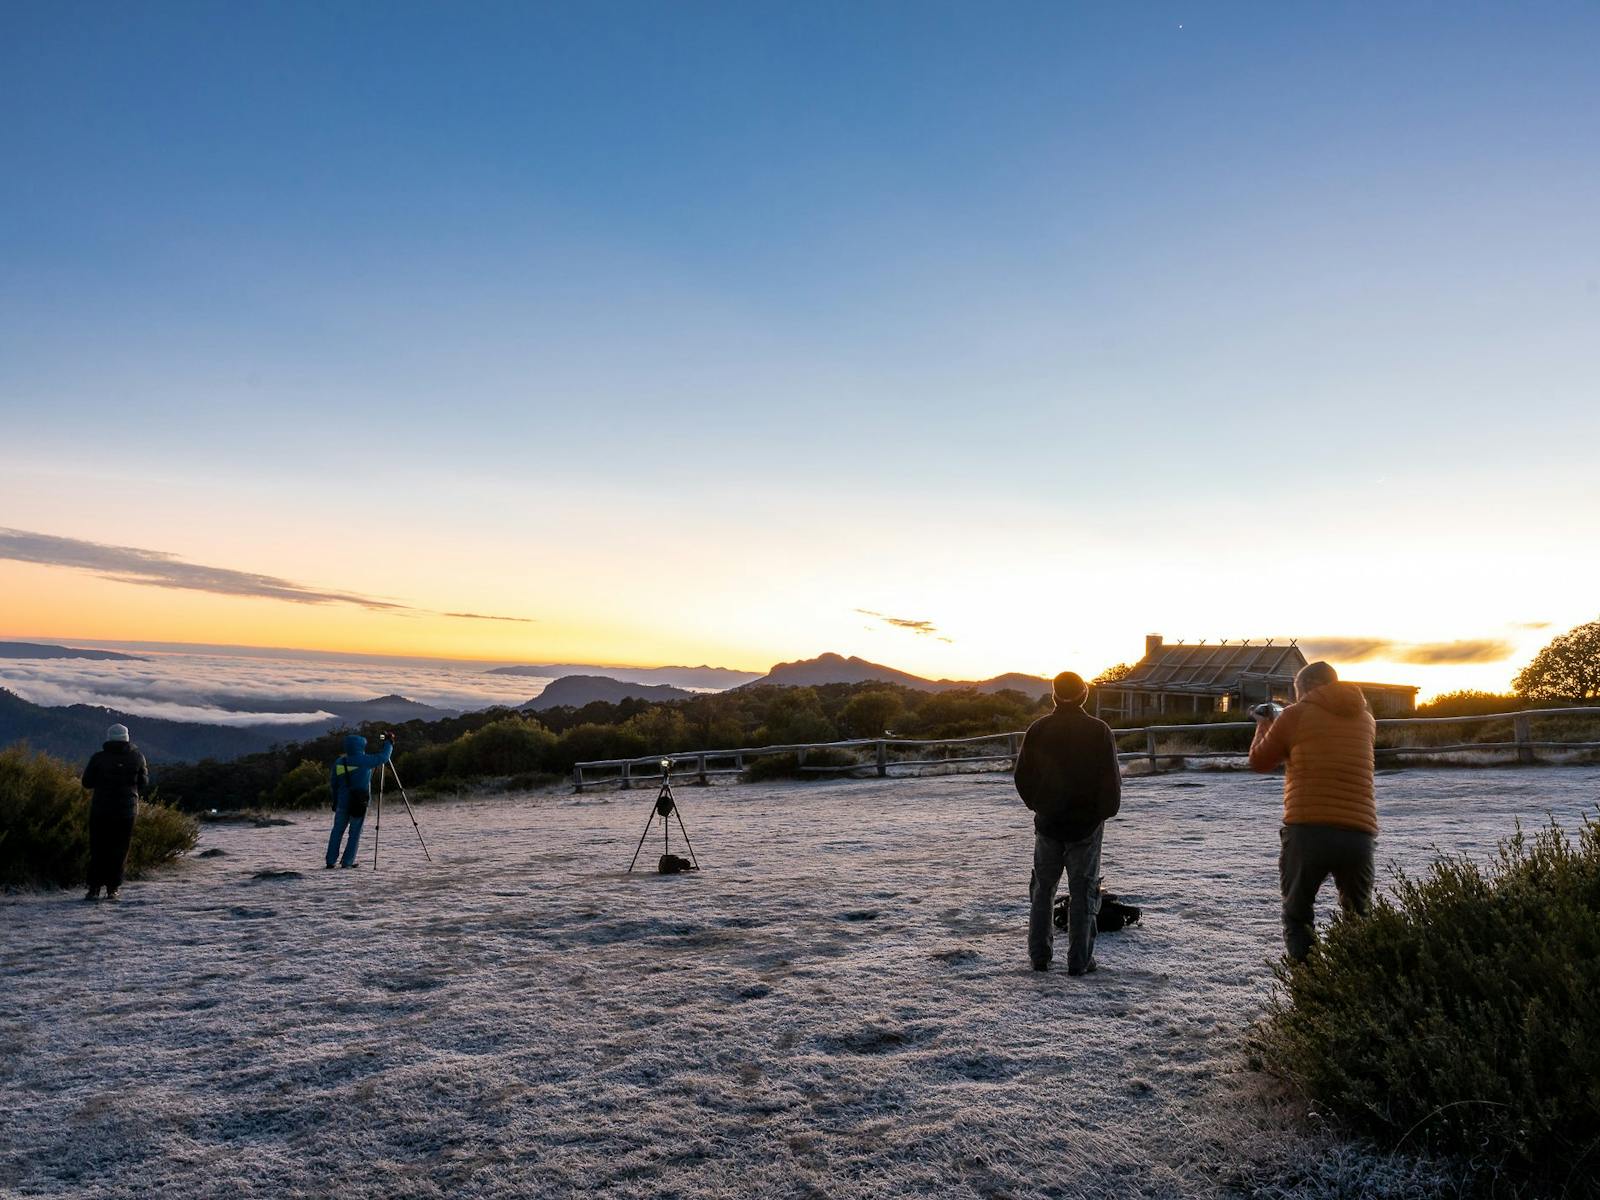 A group of hikers on a frosty morning at Craig's Hut receiving photography tips.